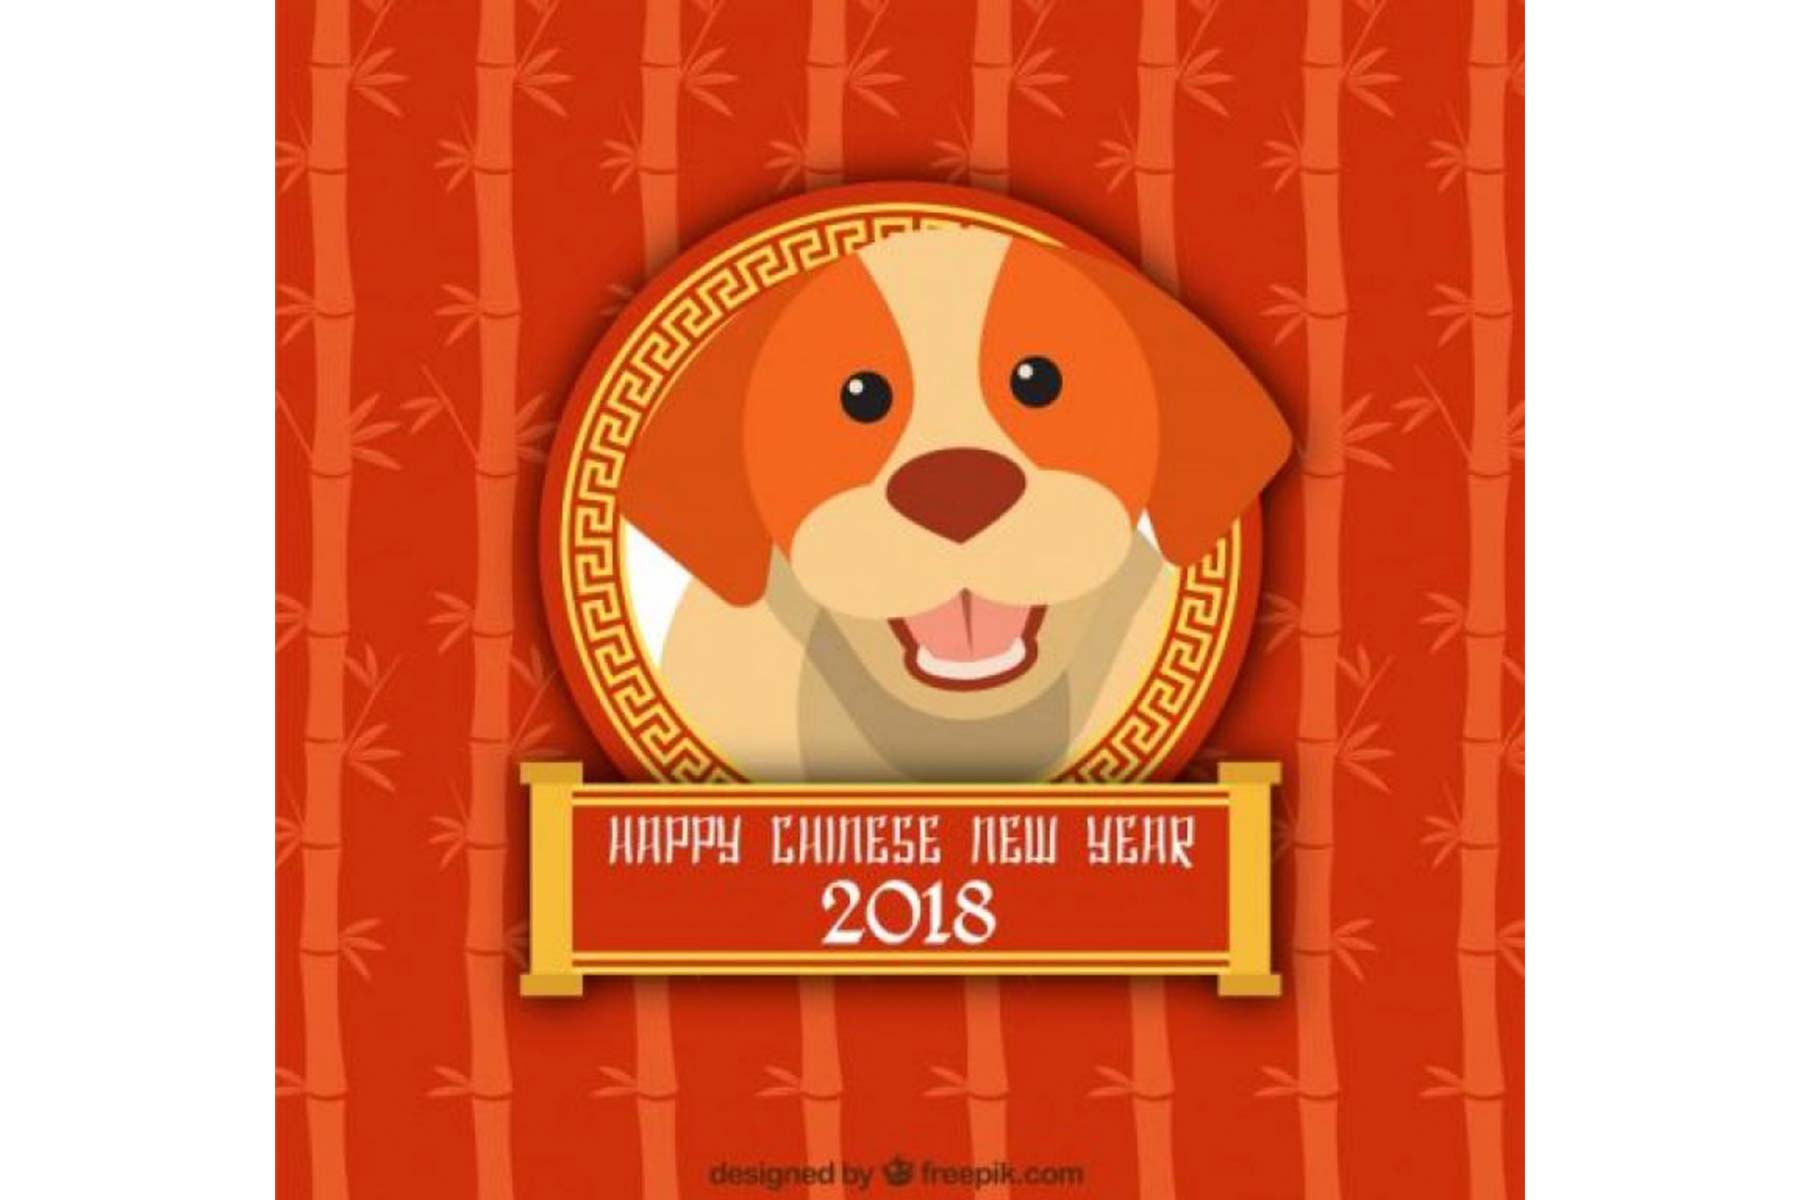 is 2018 the year of the dog